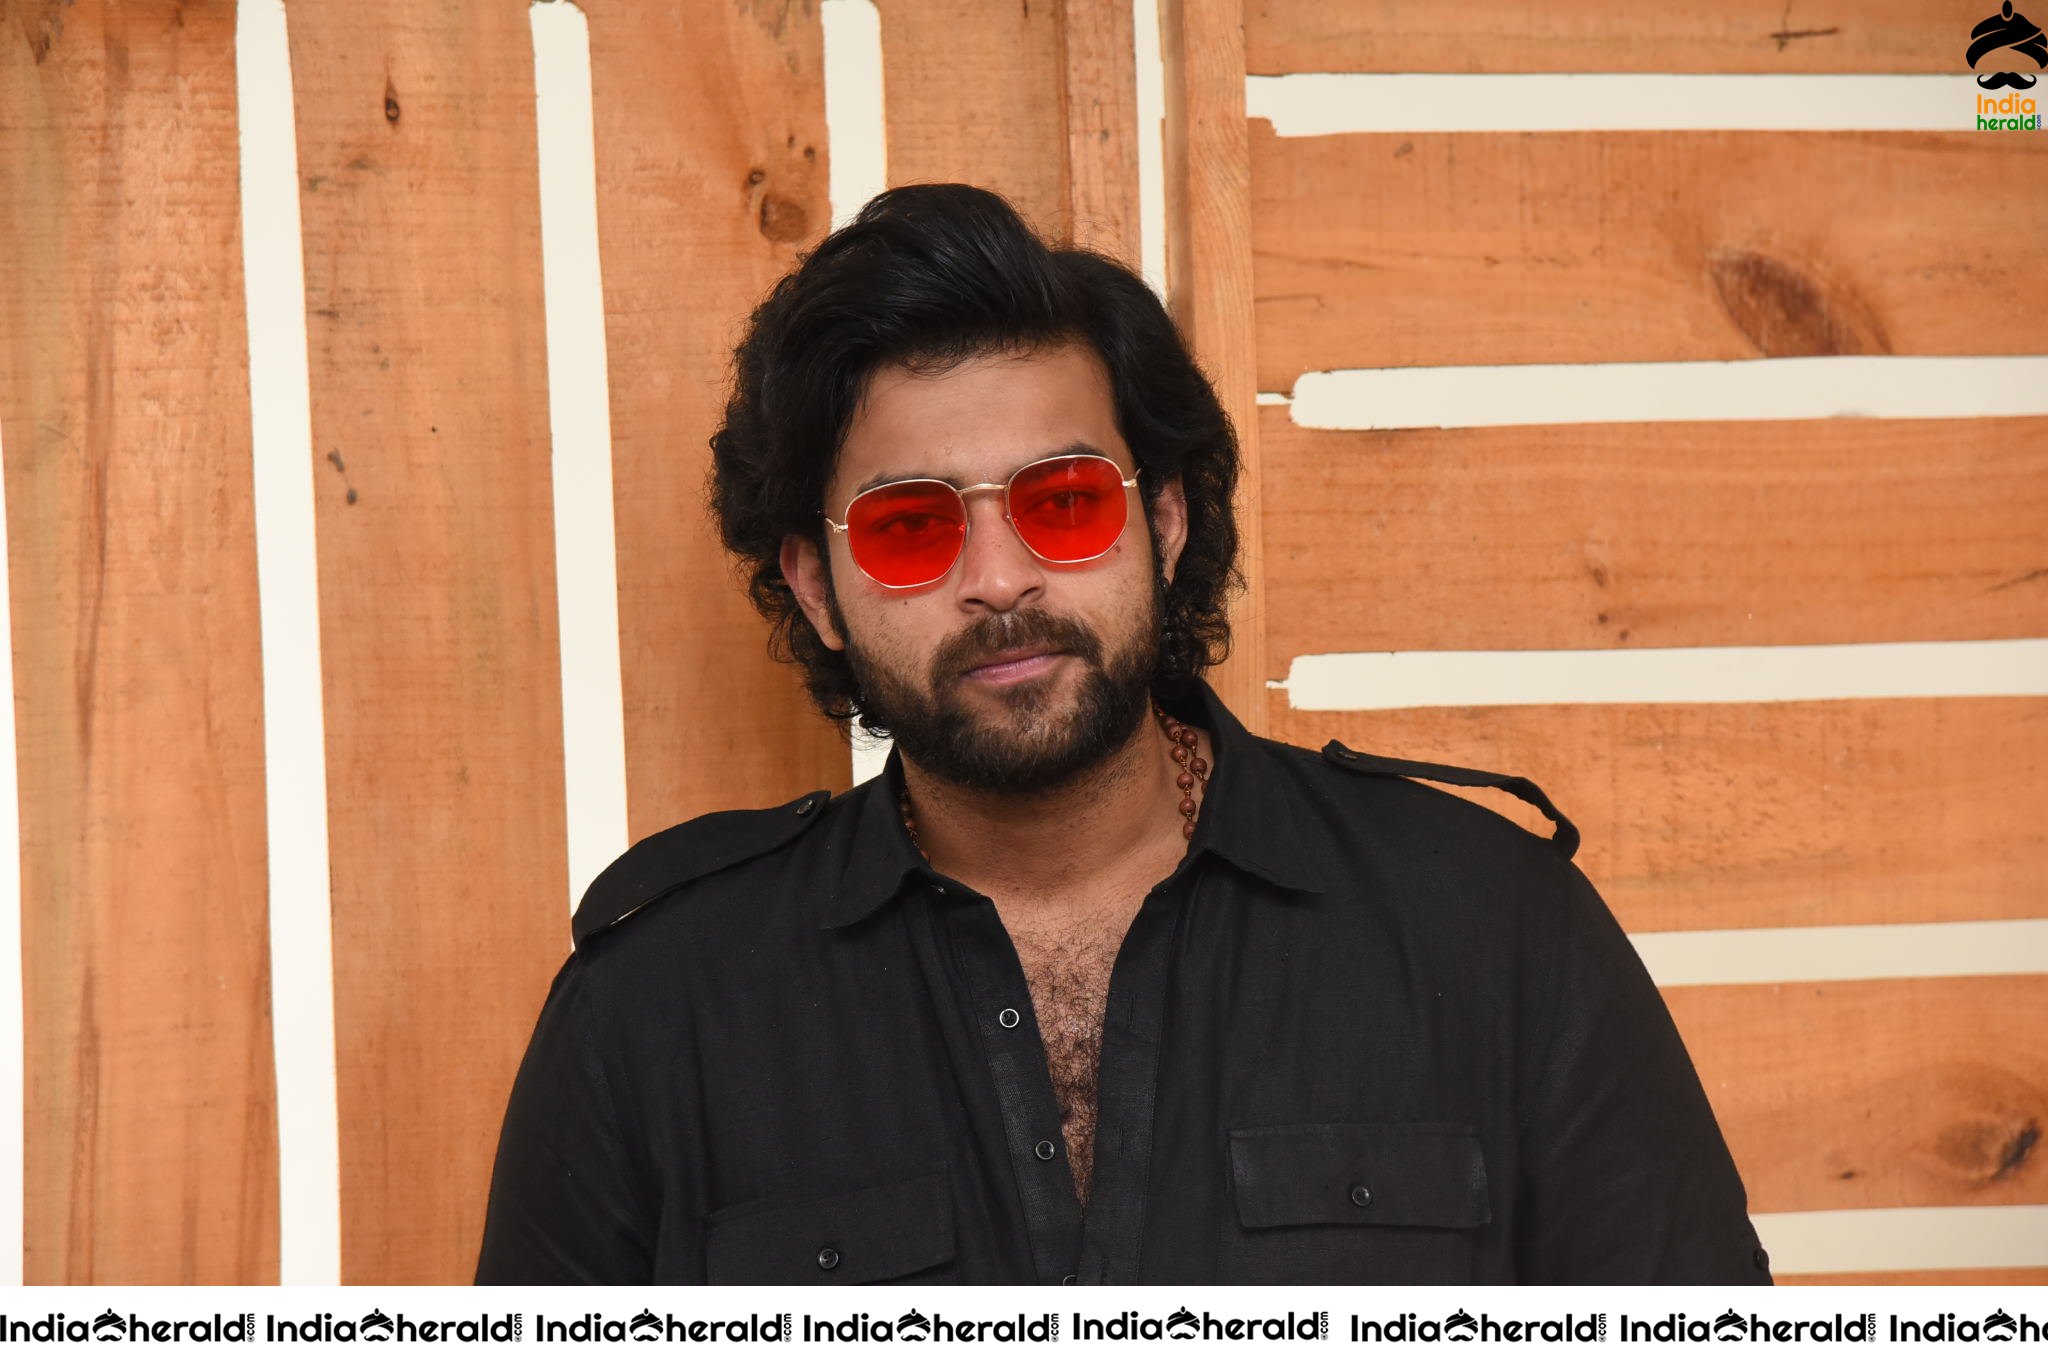 Actor Varun Tej Looking Dashing in Black and Red Coolers Set 1